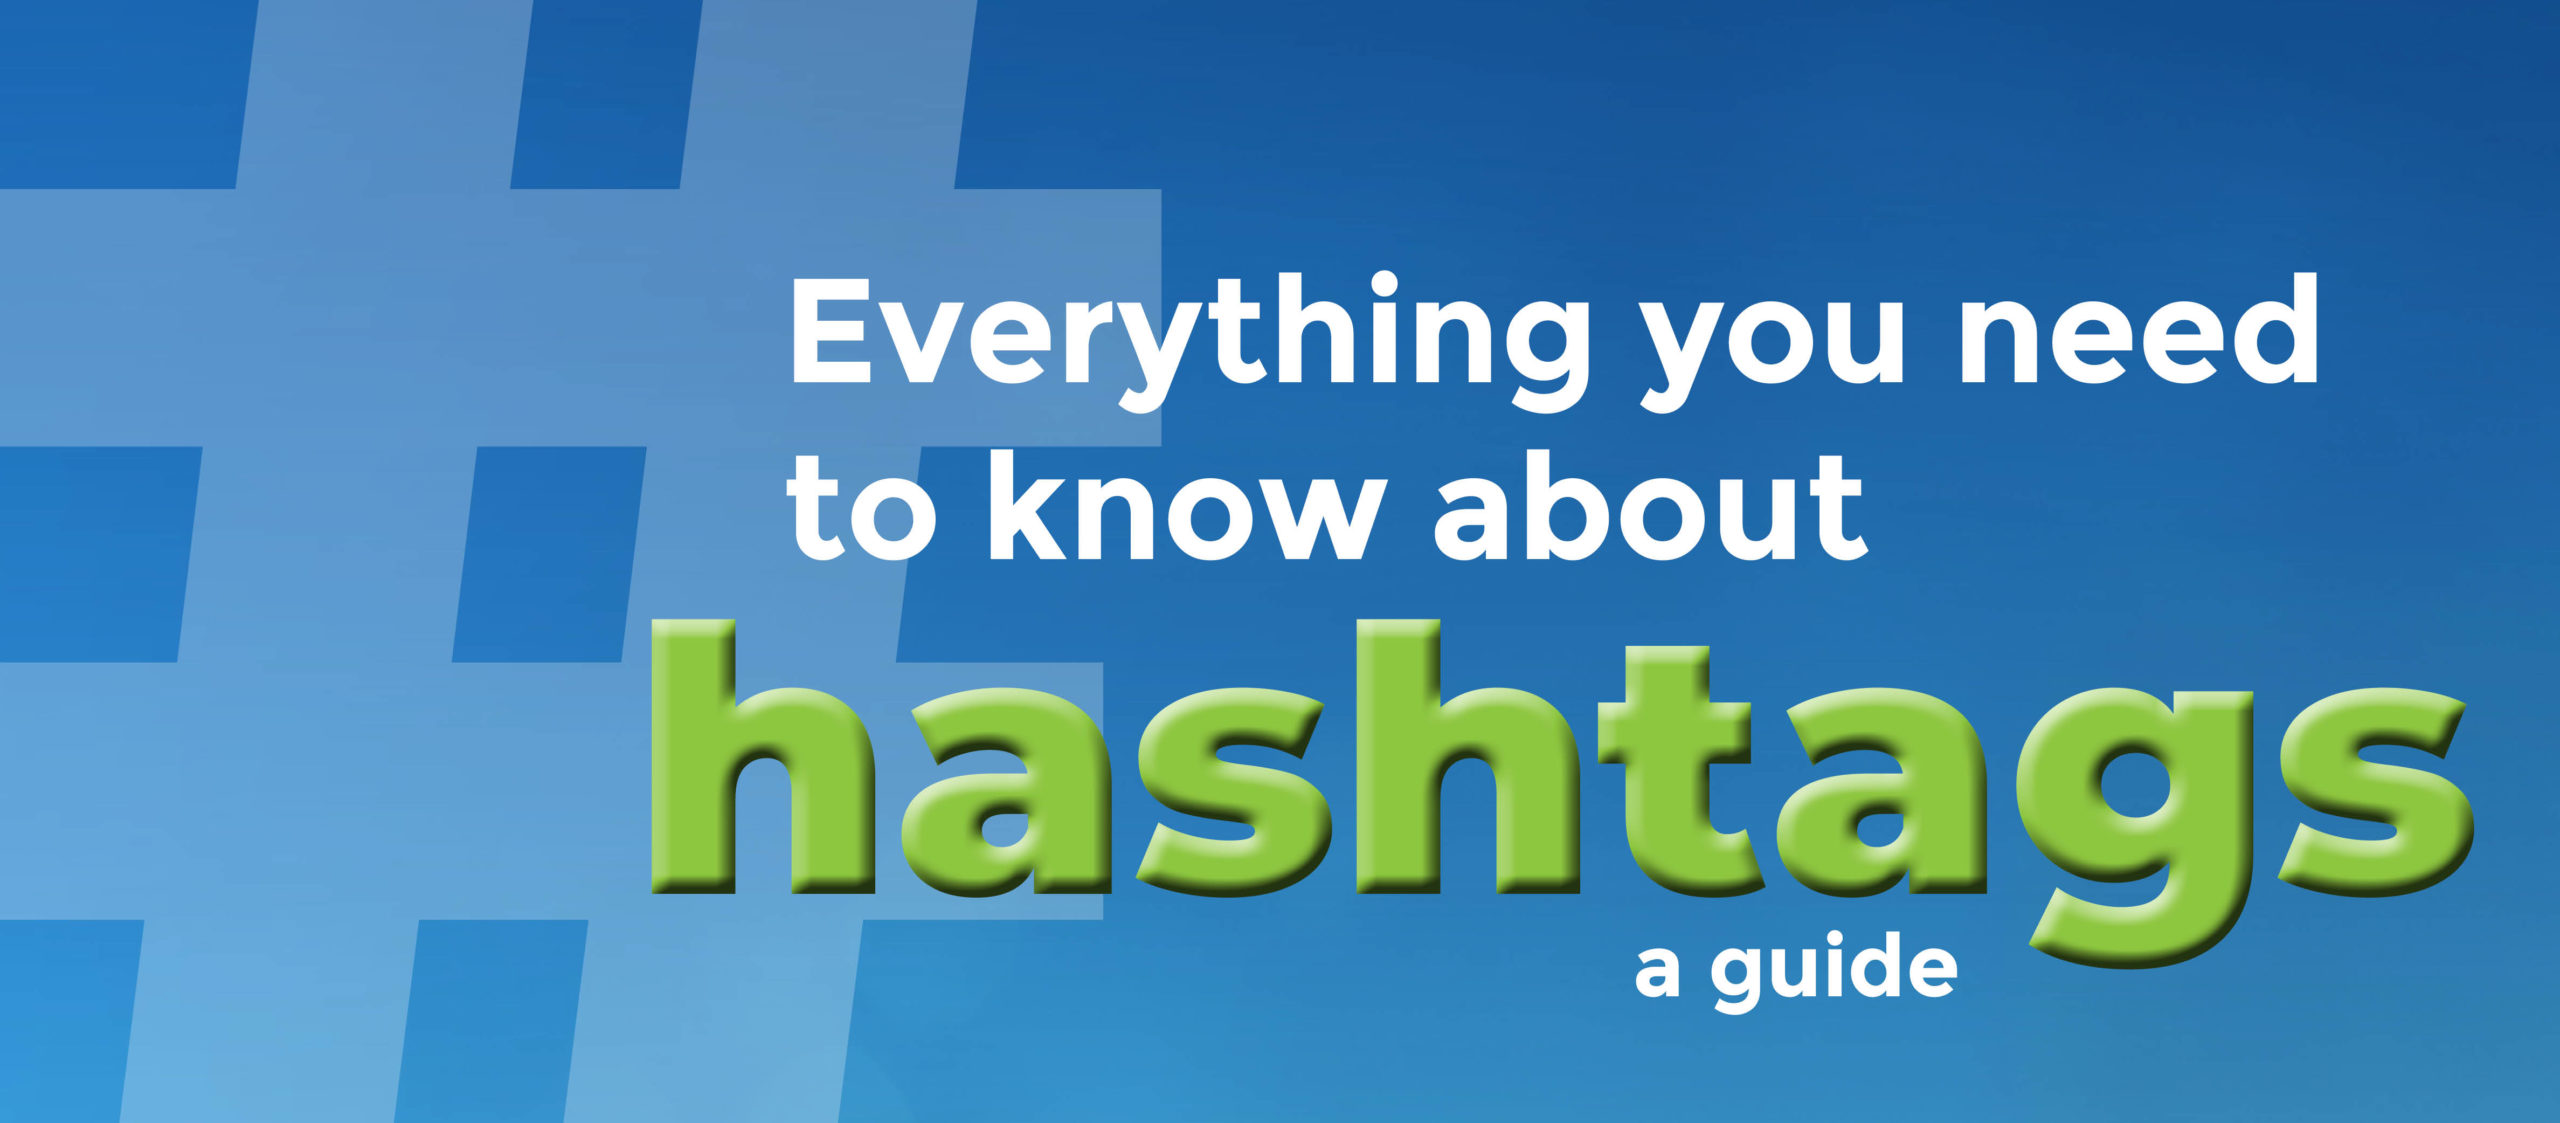 Everything You Need to Know About Hashtags: A Guide